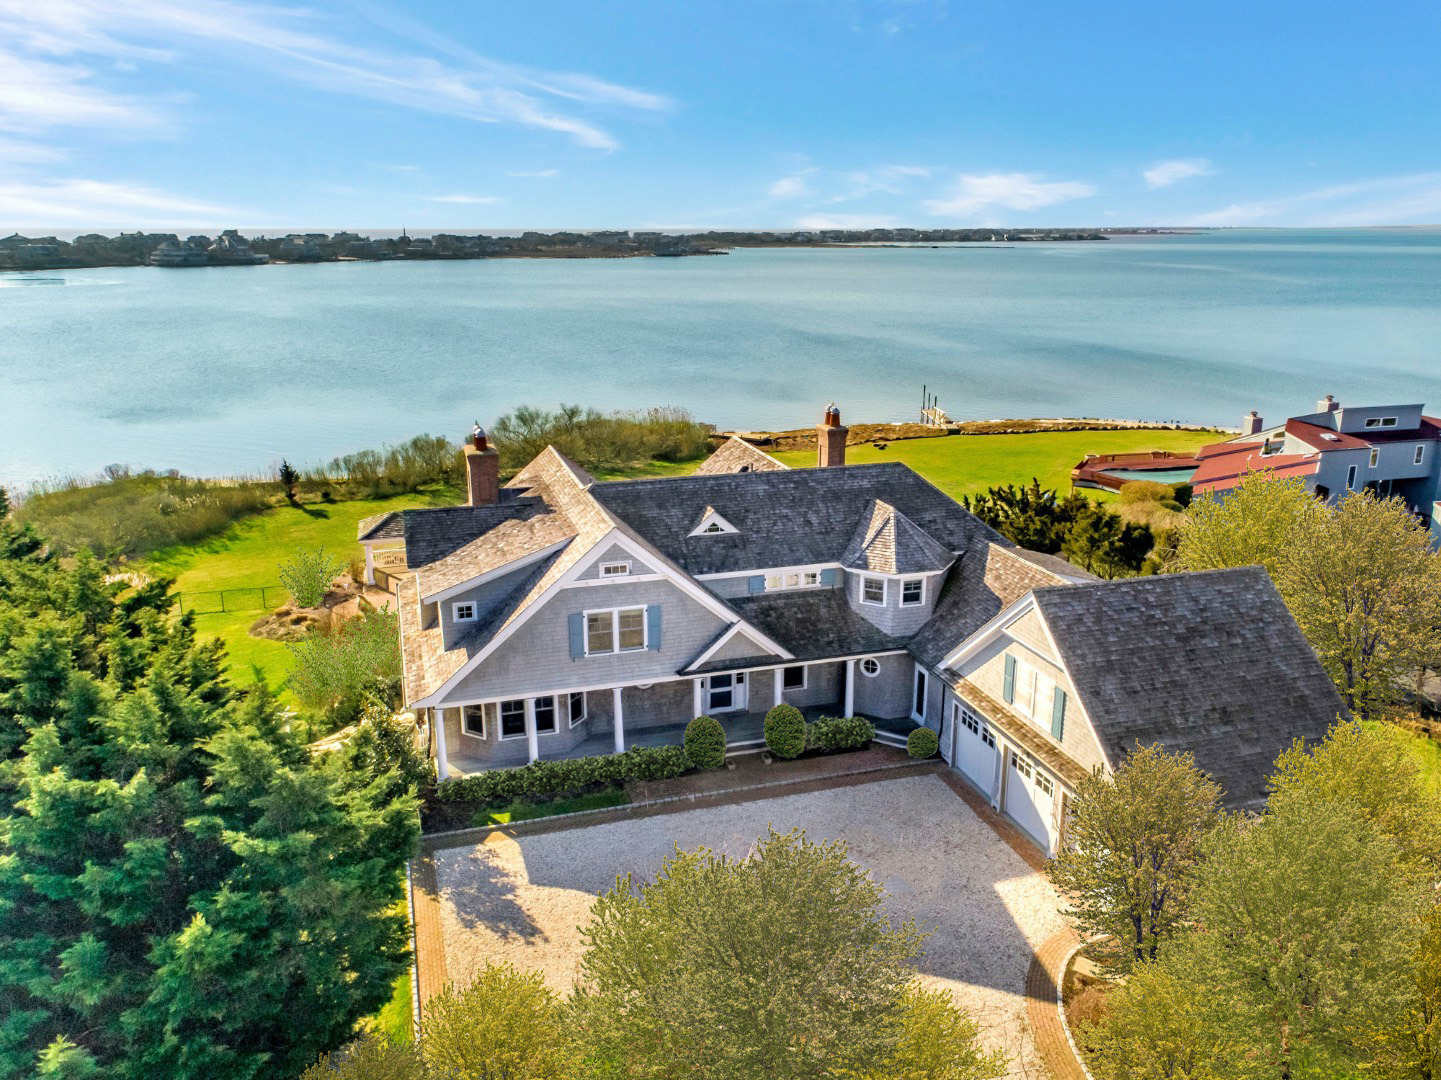 23 Stacy Drive, Westhampton Beach. COURTESY TOWN & COUNTRY REAL ESTATE